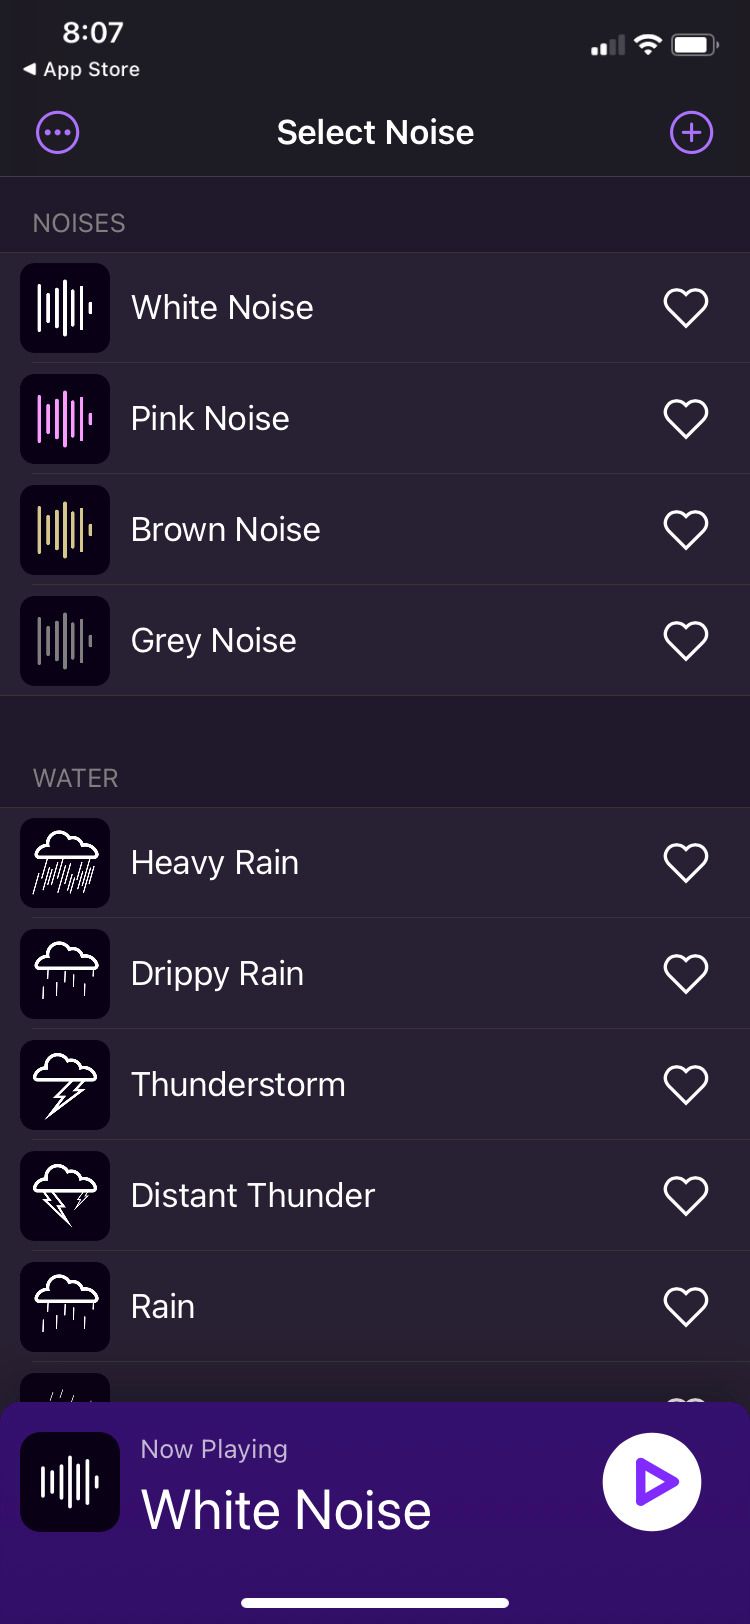 Dark Noise App noises and water sounds